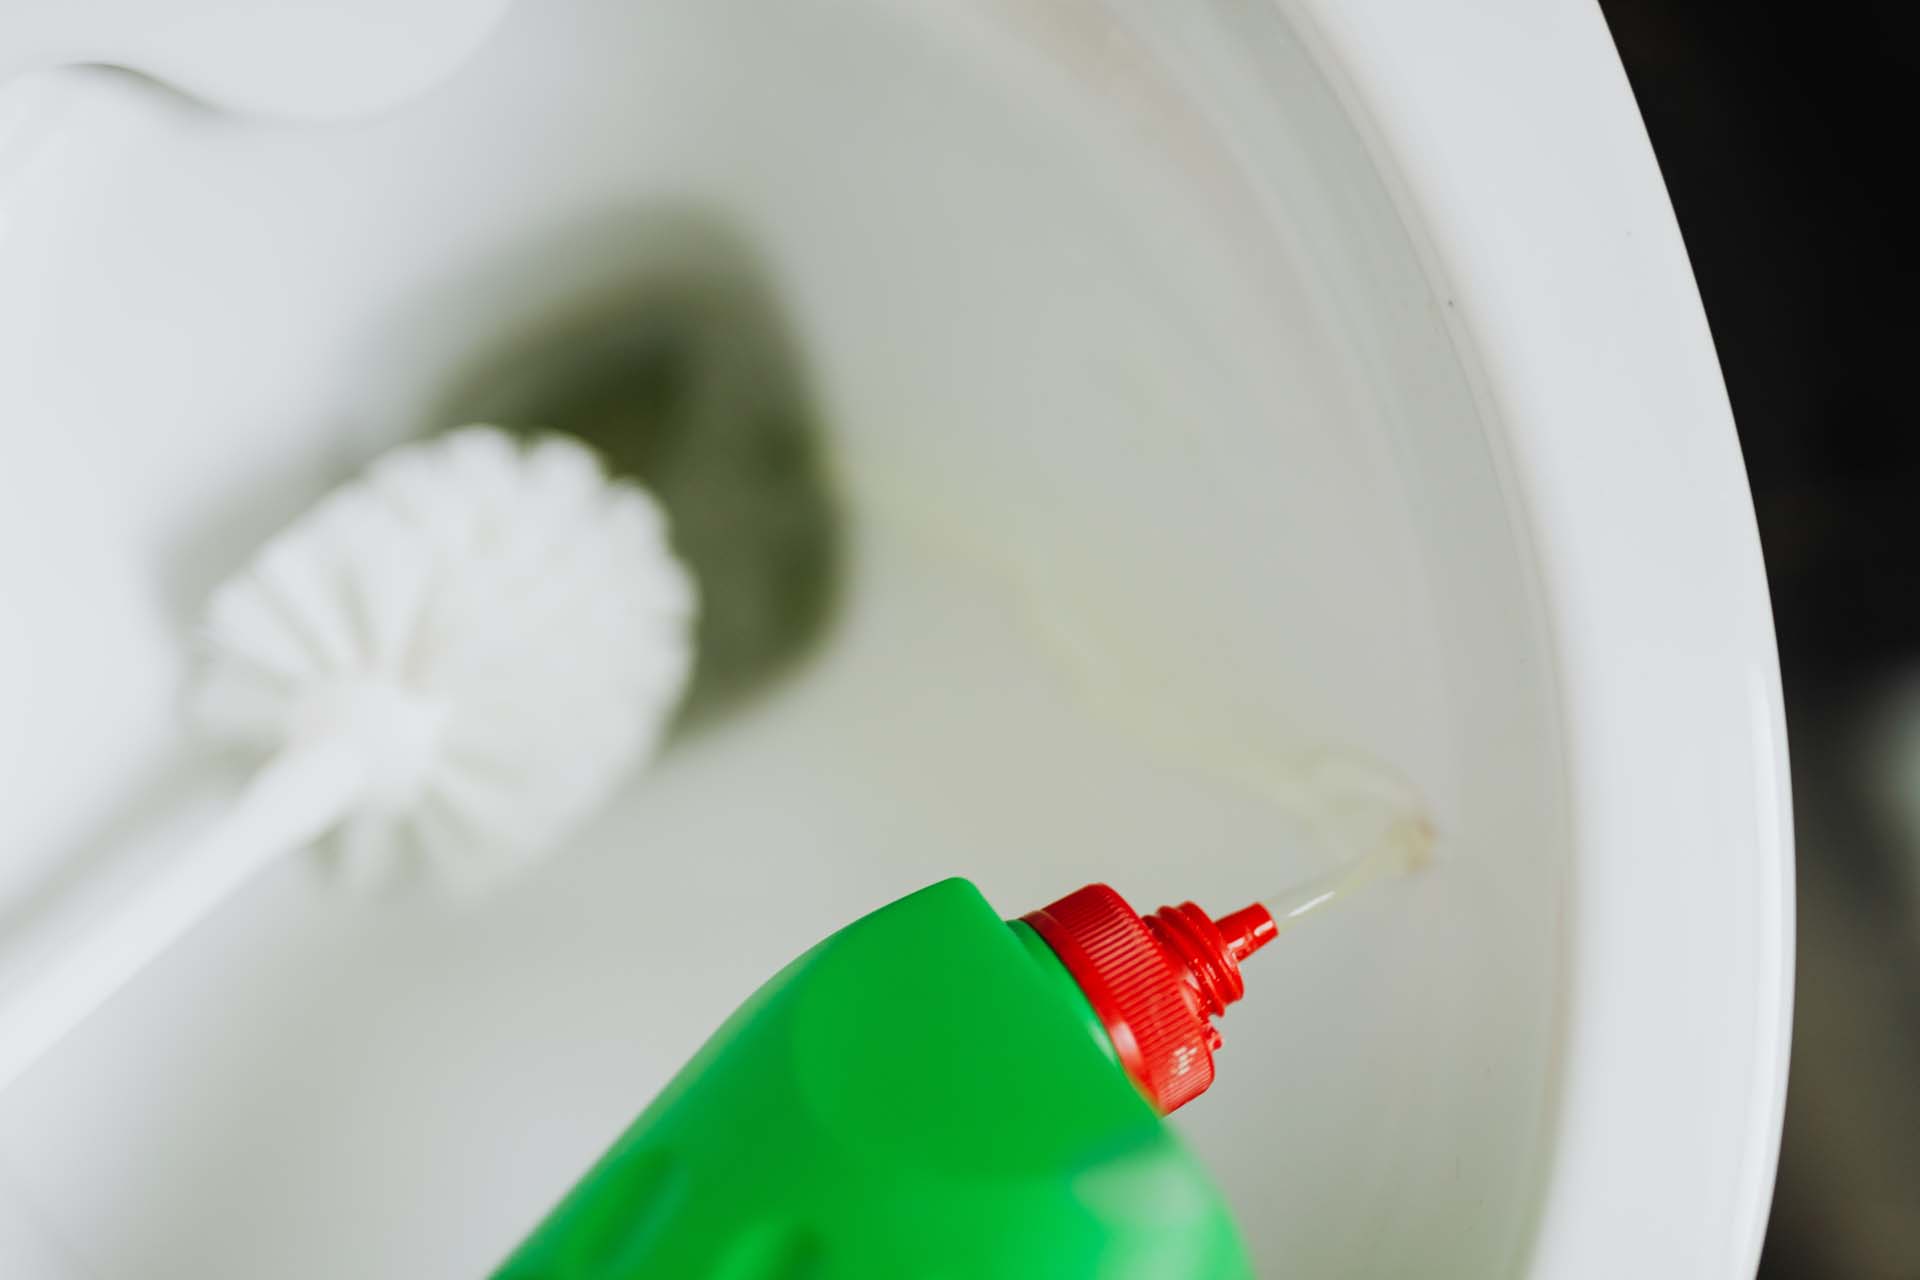 How To Prevent Toilet Bowl Stains